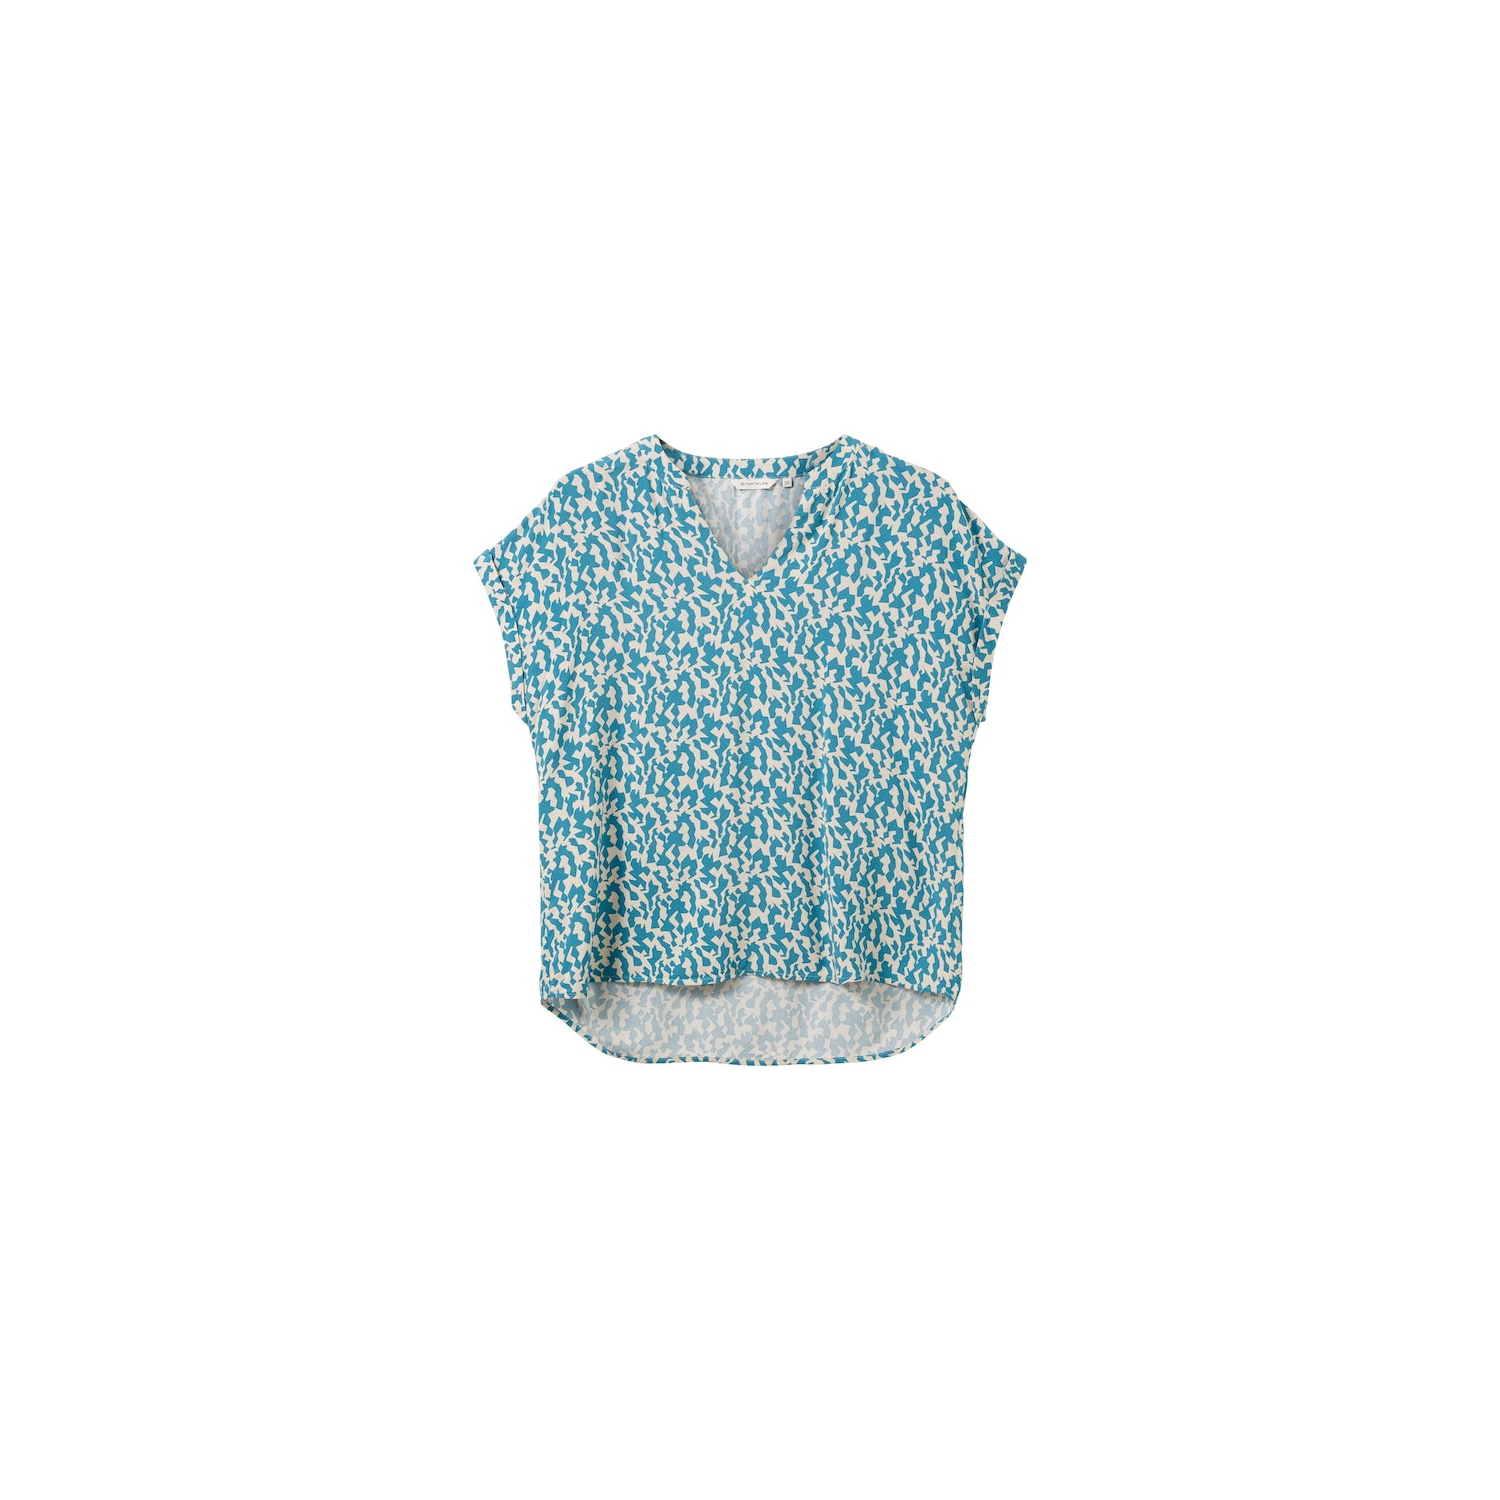 TOM TAILOR Kurzarm-Bluse petrol small € 25,00 design, abstract